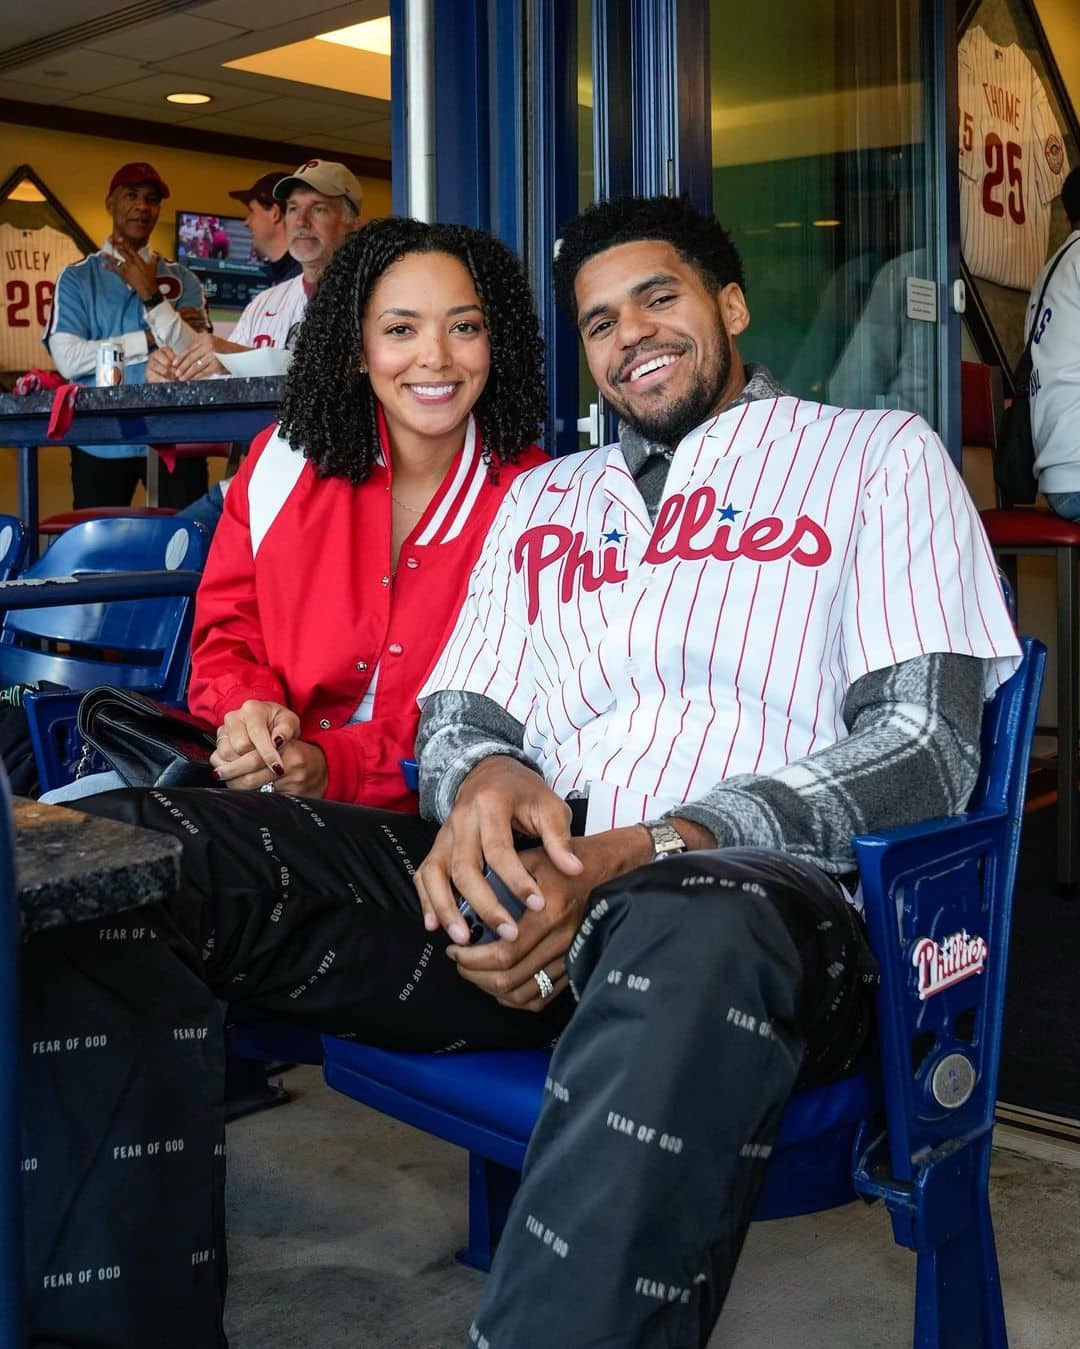 Jasmine Winton and Tobias Harris from his Instagram: "Reality itself is gorgeous.It is the plenum; the fullness of total joy."